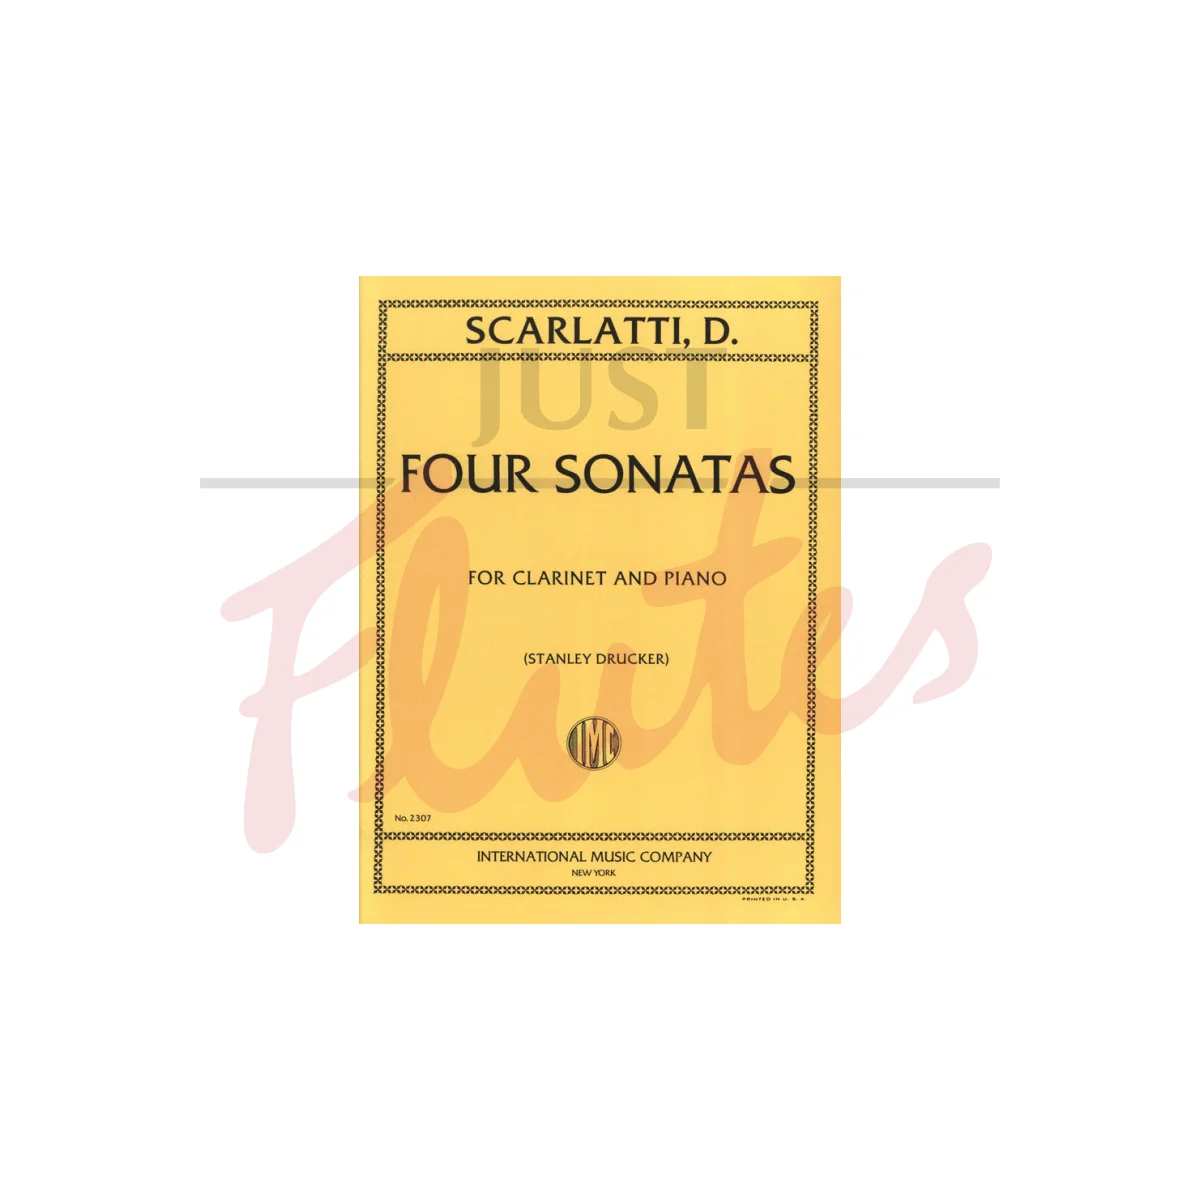 Four Sonatas for Clarinet and Piano